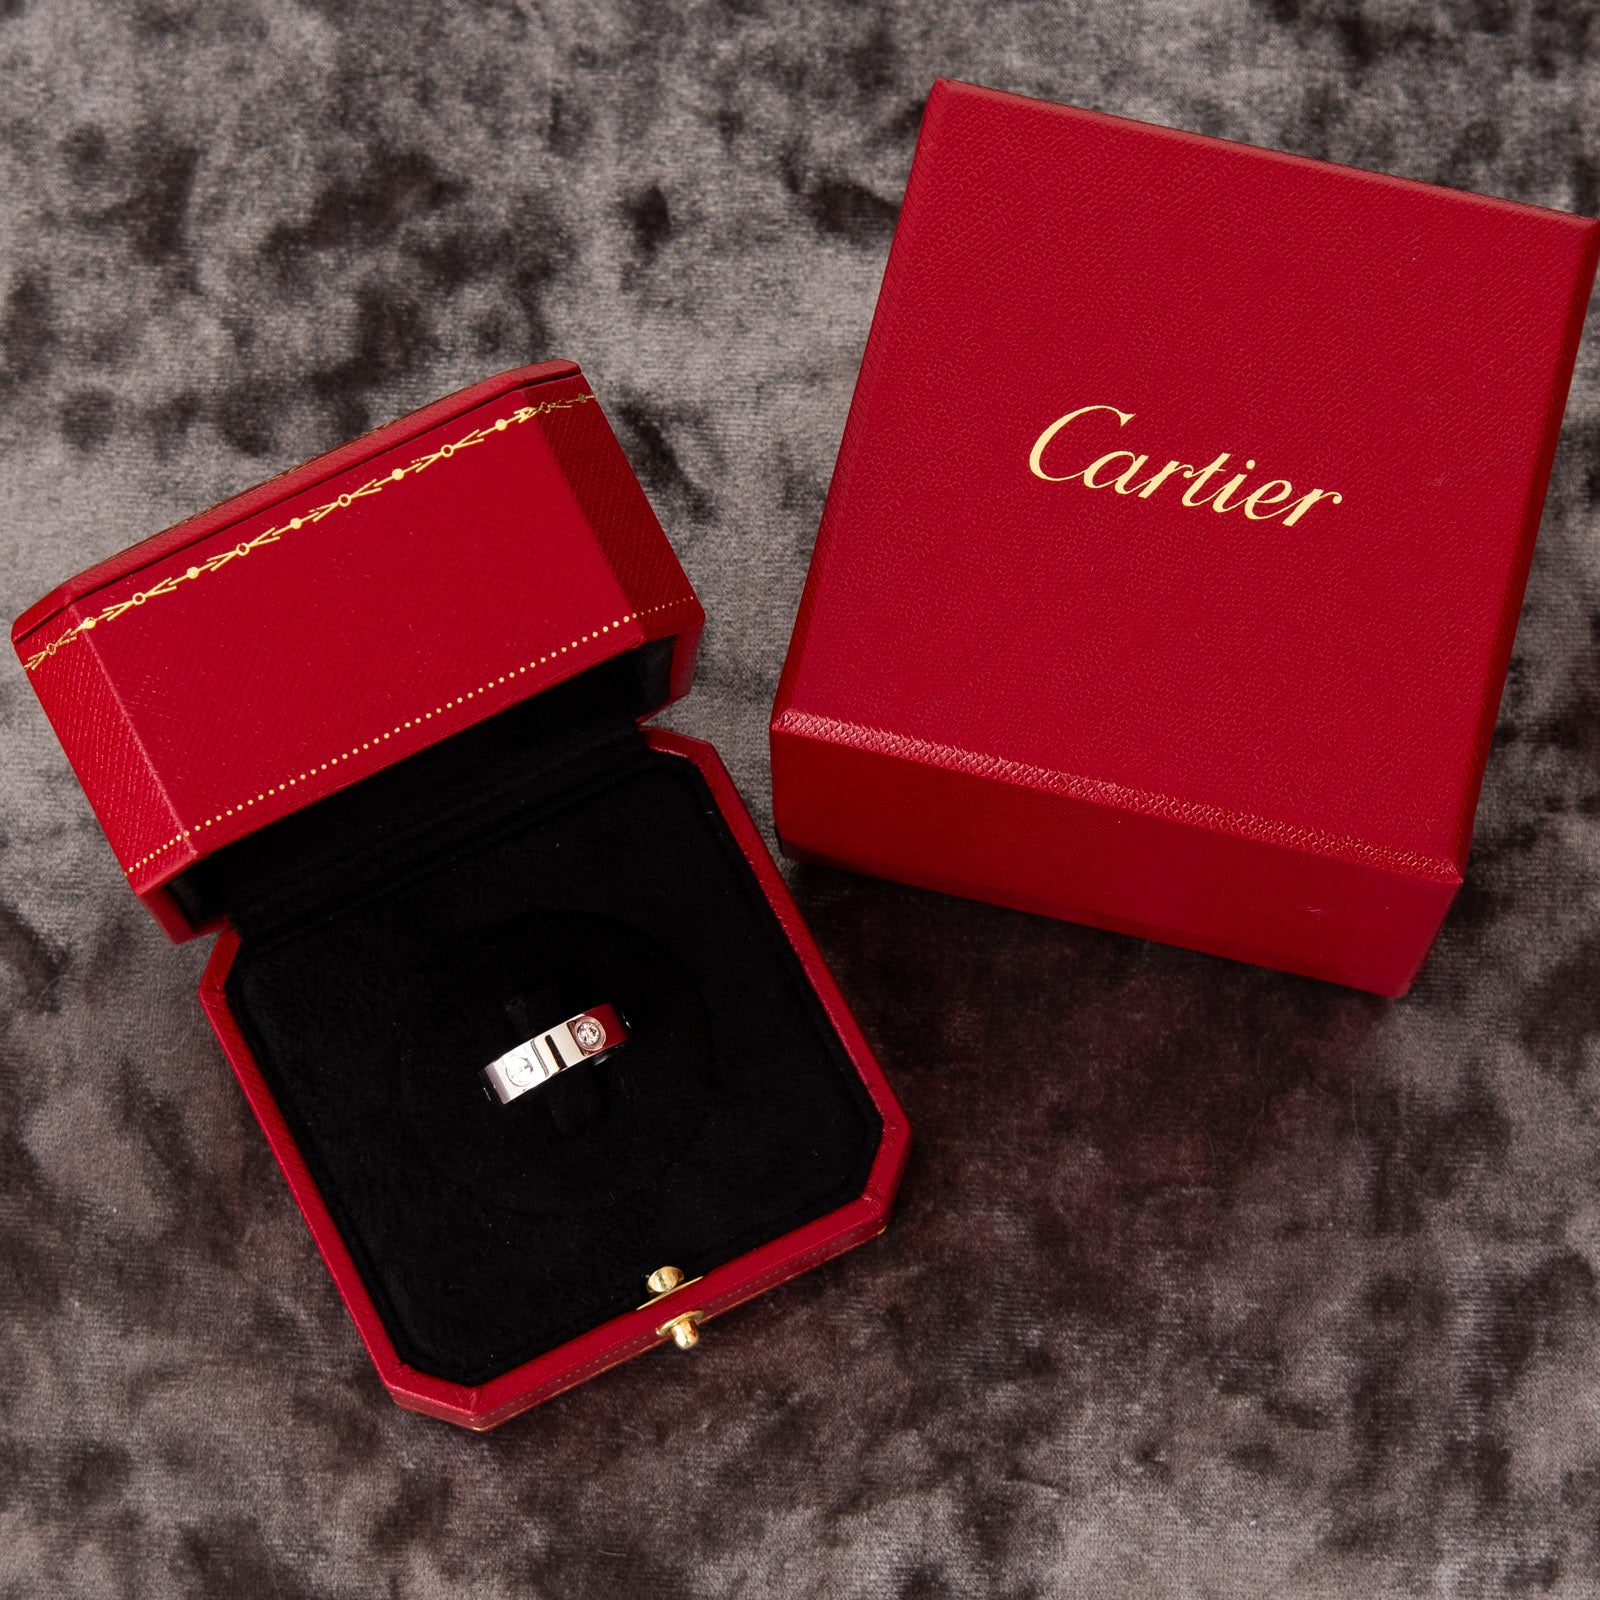 Cartier White Gold Love Ring With Diamonds - Image 2 of 4